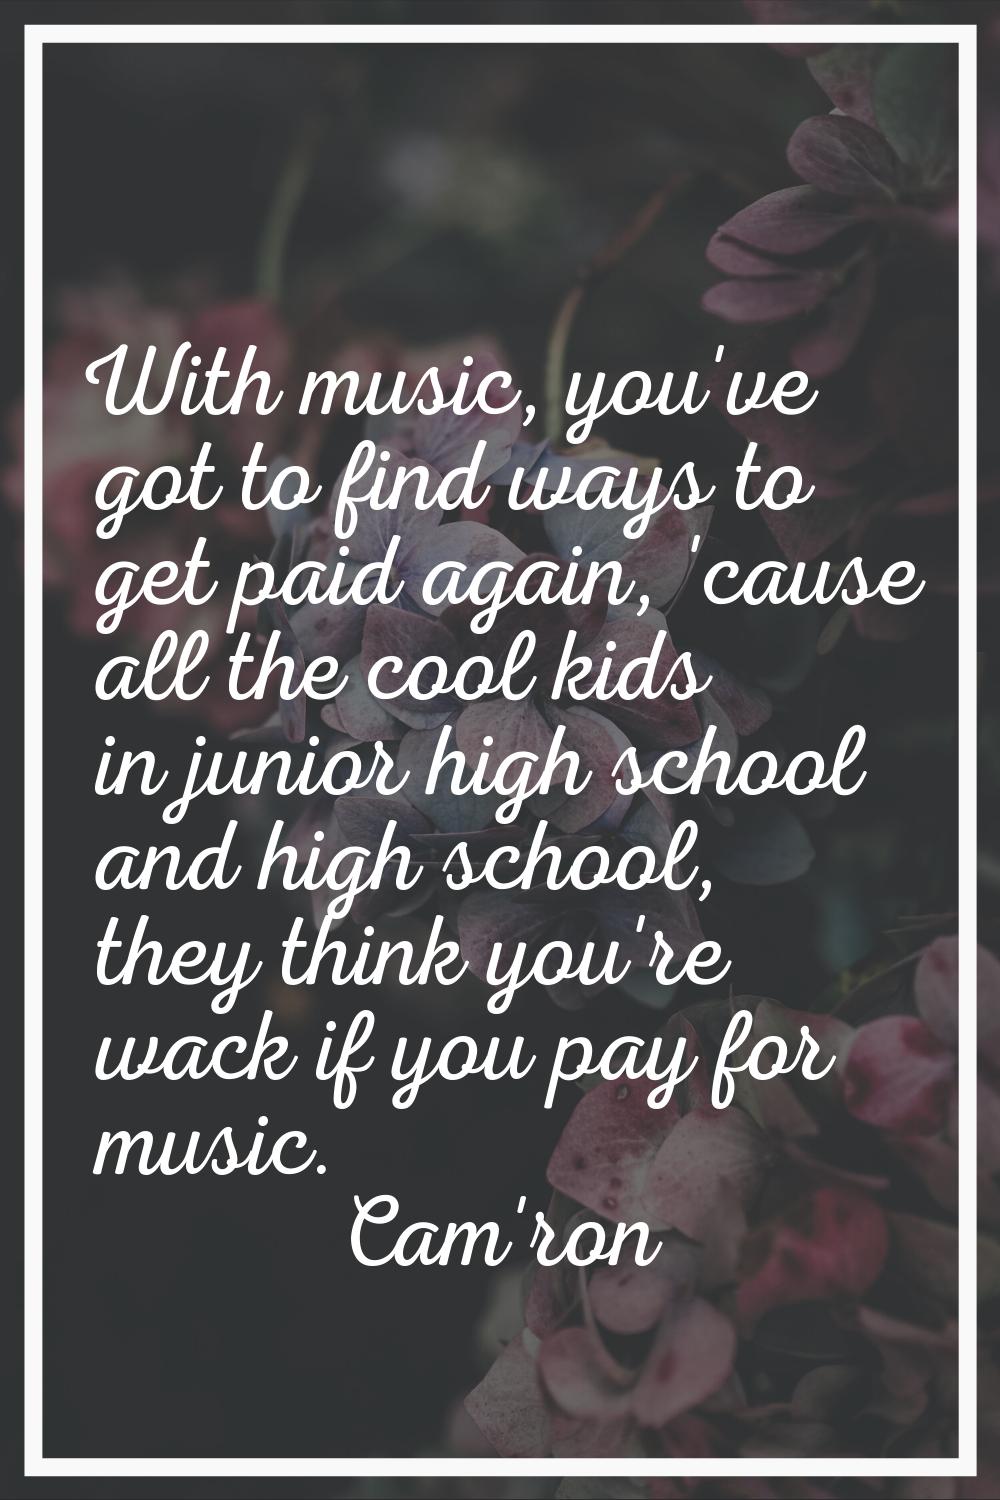 With music, you've got to find ways to get paid again, 'cause all the cool kids in junior high scho